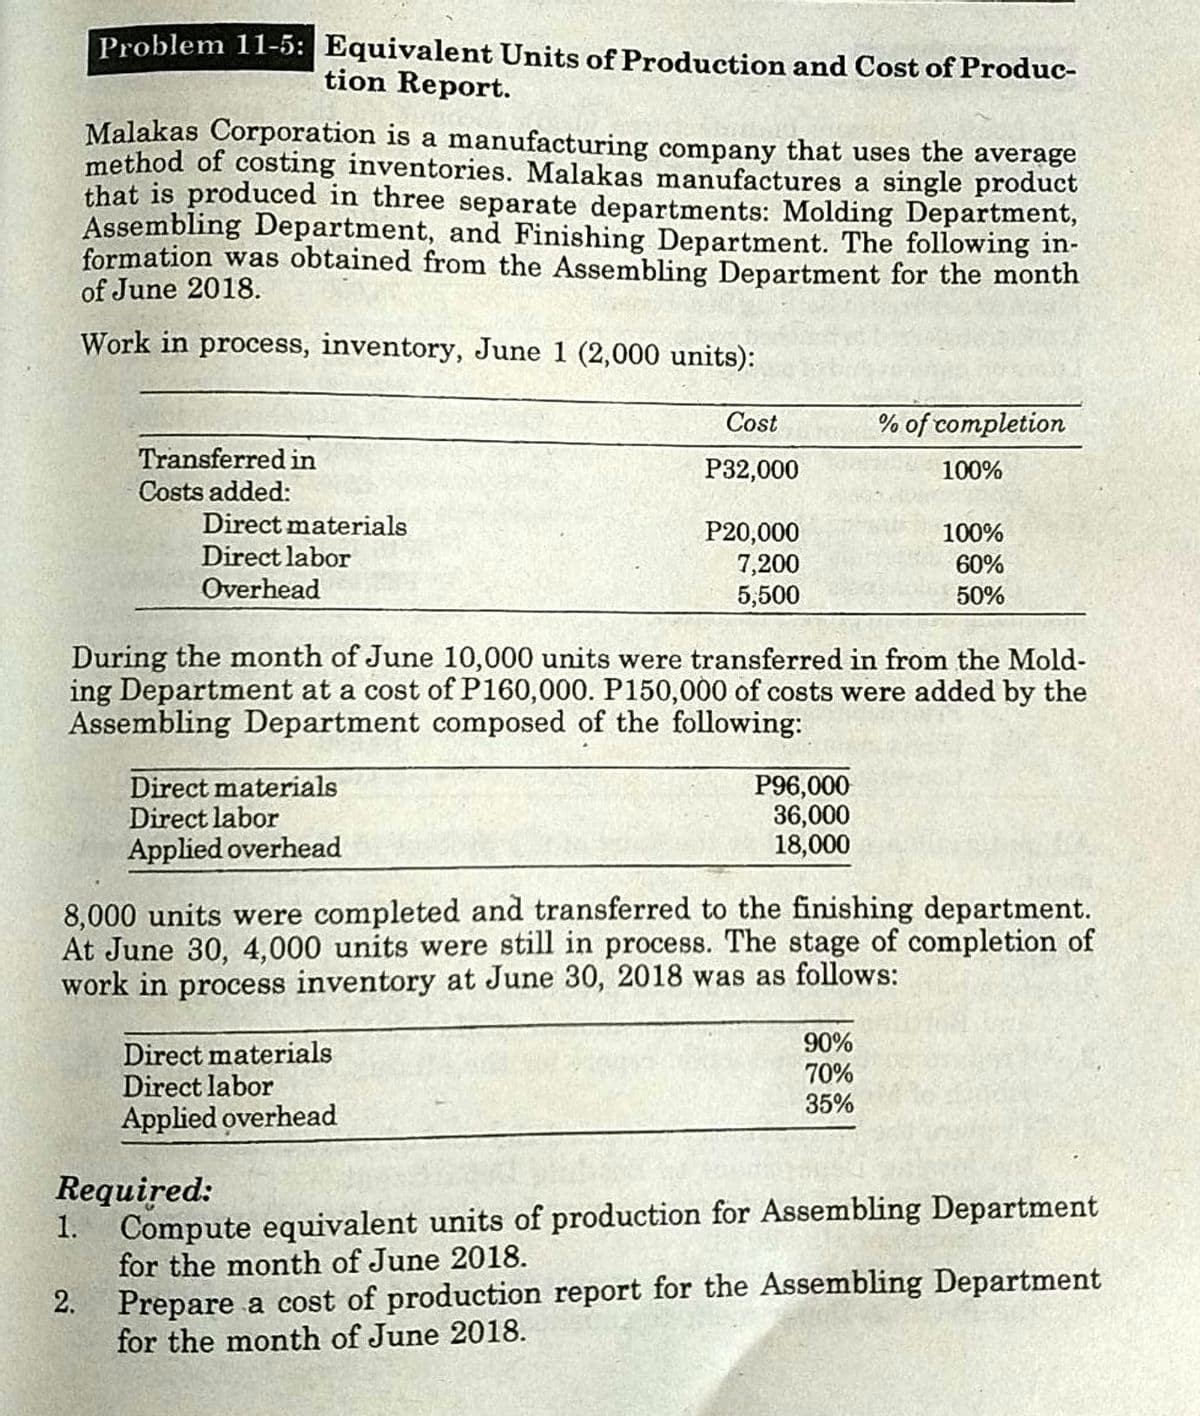 Problem 11-5: Equivalent Units of Production and Cost of Produc-
tion Report.
Malakas Corporation is a manufacturing company that uses the average
method of costing inventories. Malakas manufactures a single product
that is produced in three separate departments: Molding Department,
Assembling Department, and Finishing Department. The following in-
formation was obtained from the Assembling Department for the month
of June 2018.
Work in process, inventory, June 1 (2,000 units):
Cost
% of completion
Transferred in
Р32,000
100%
Costs added:
Direct materials
Direct labor
Overhead
P20,000
7,200
5,500
100%
60%
50%
During the month of June 10,000 units were transferred in from the Mold-
ing Department at a cost of P160,000. P150,000 of costs were added by the
Assembling Department composed of the following:
Direct materials
Direct labor
Applied overhead
P96,000
36,000
18,000
8,000 units were completed and transferred to the finishing department.
At June 30, 4,000 units were still in process. The stage of completion of
work in process inventory at June 30, 2018 was as follows:
Direct materials
Direct labor
90%
70%
35%
Applied overhead
Required:
1.
Compute equivalent units of production for Assembling Department
for the month of June 2018.
2.
Prepare a cost of production report for the Assembling Department
for the month of June 2018.
